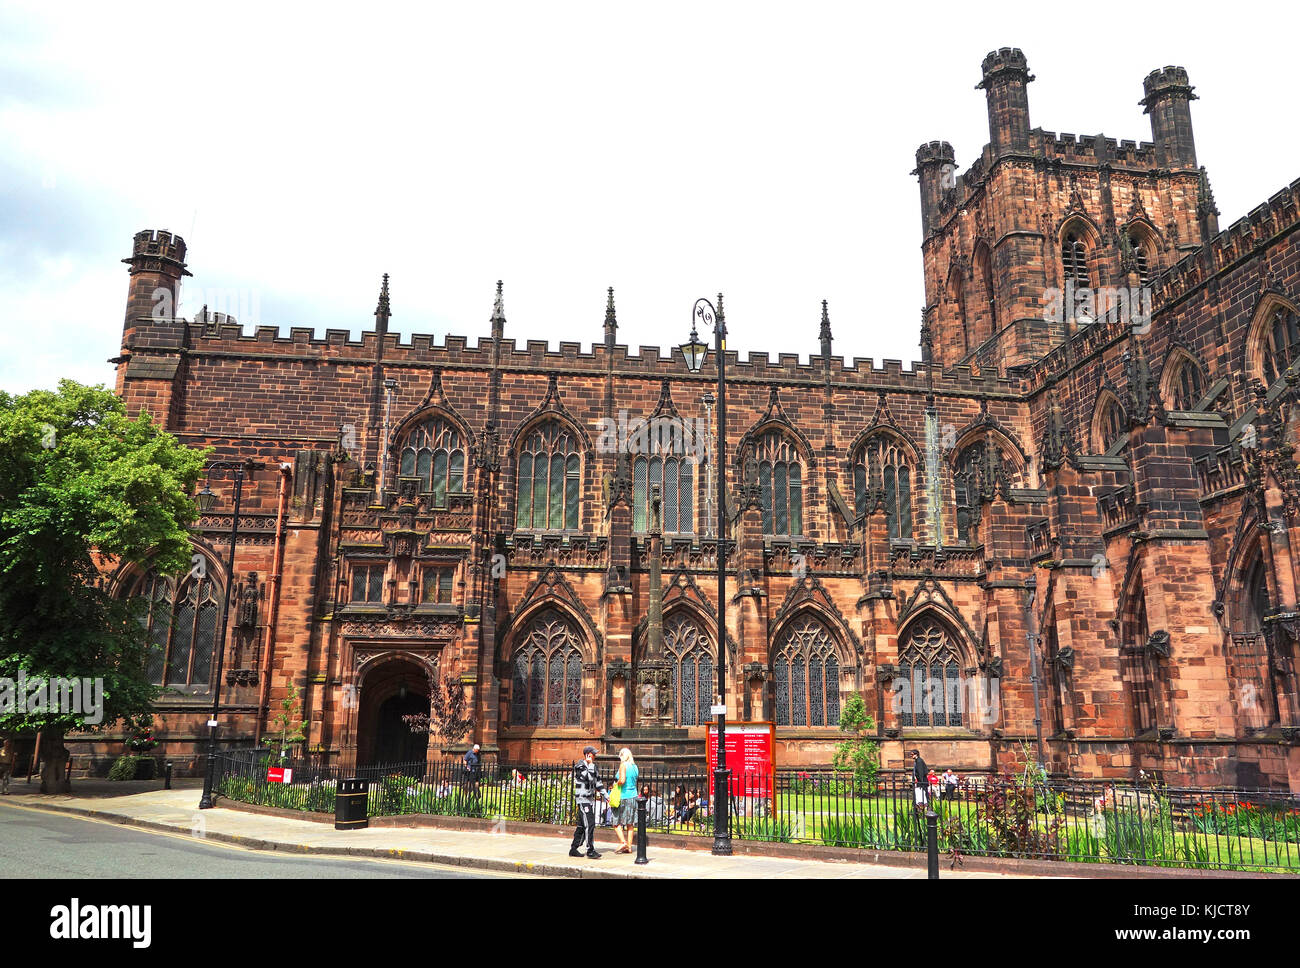 medieval cathedral, construction began in 1092, chester, cheshire, england, britain, uk. Stock Photo